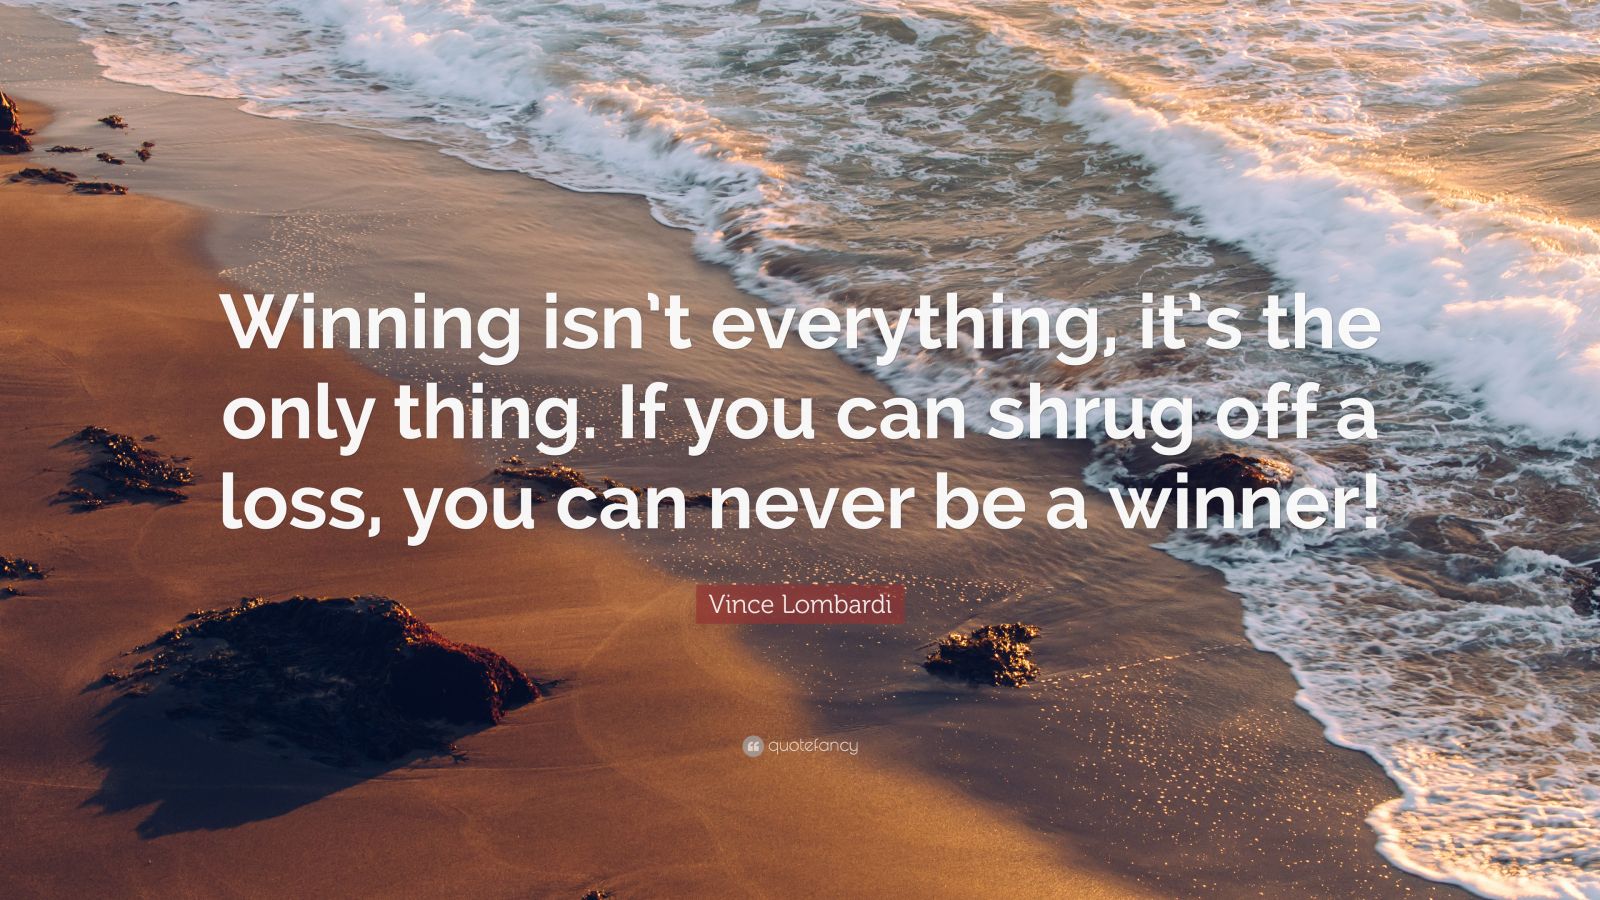 Vince Lombardi Quote: “Winning isn’t everything, it’s the only thing